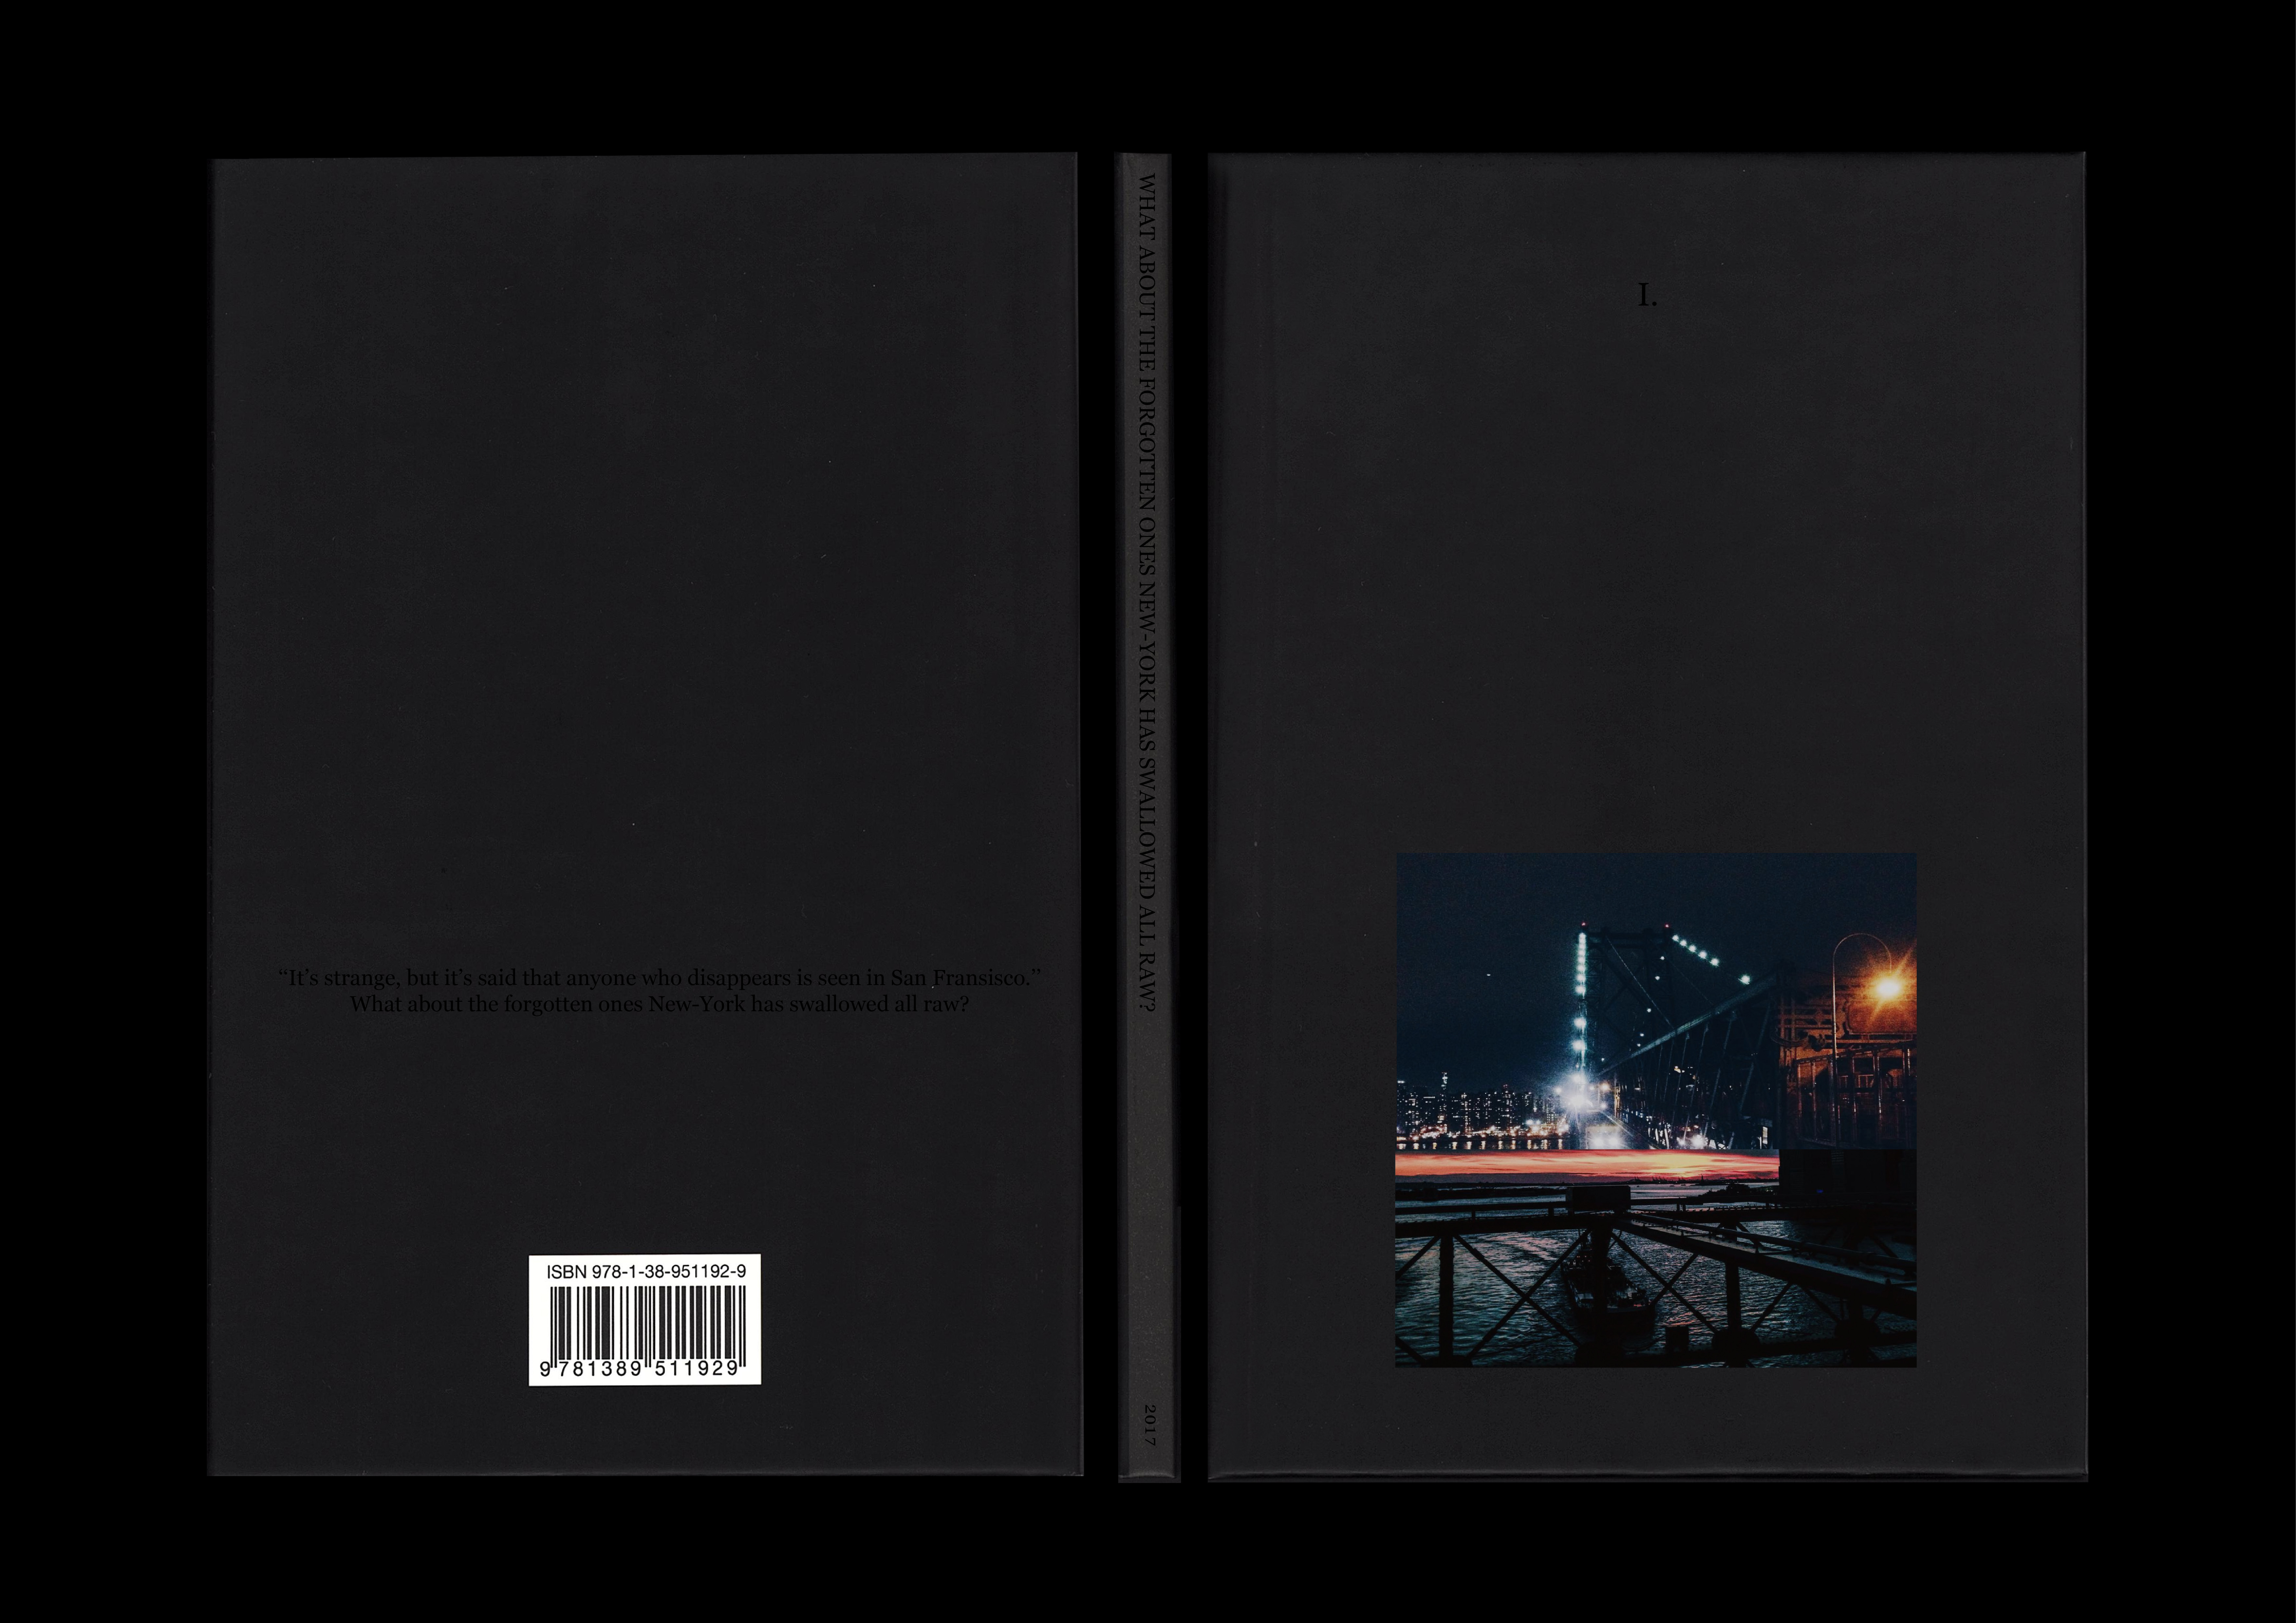 http://julienbaiamonte.com/content/1-projects/untitled-photobook-i/ce_nyc_test.jpg